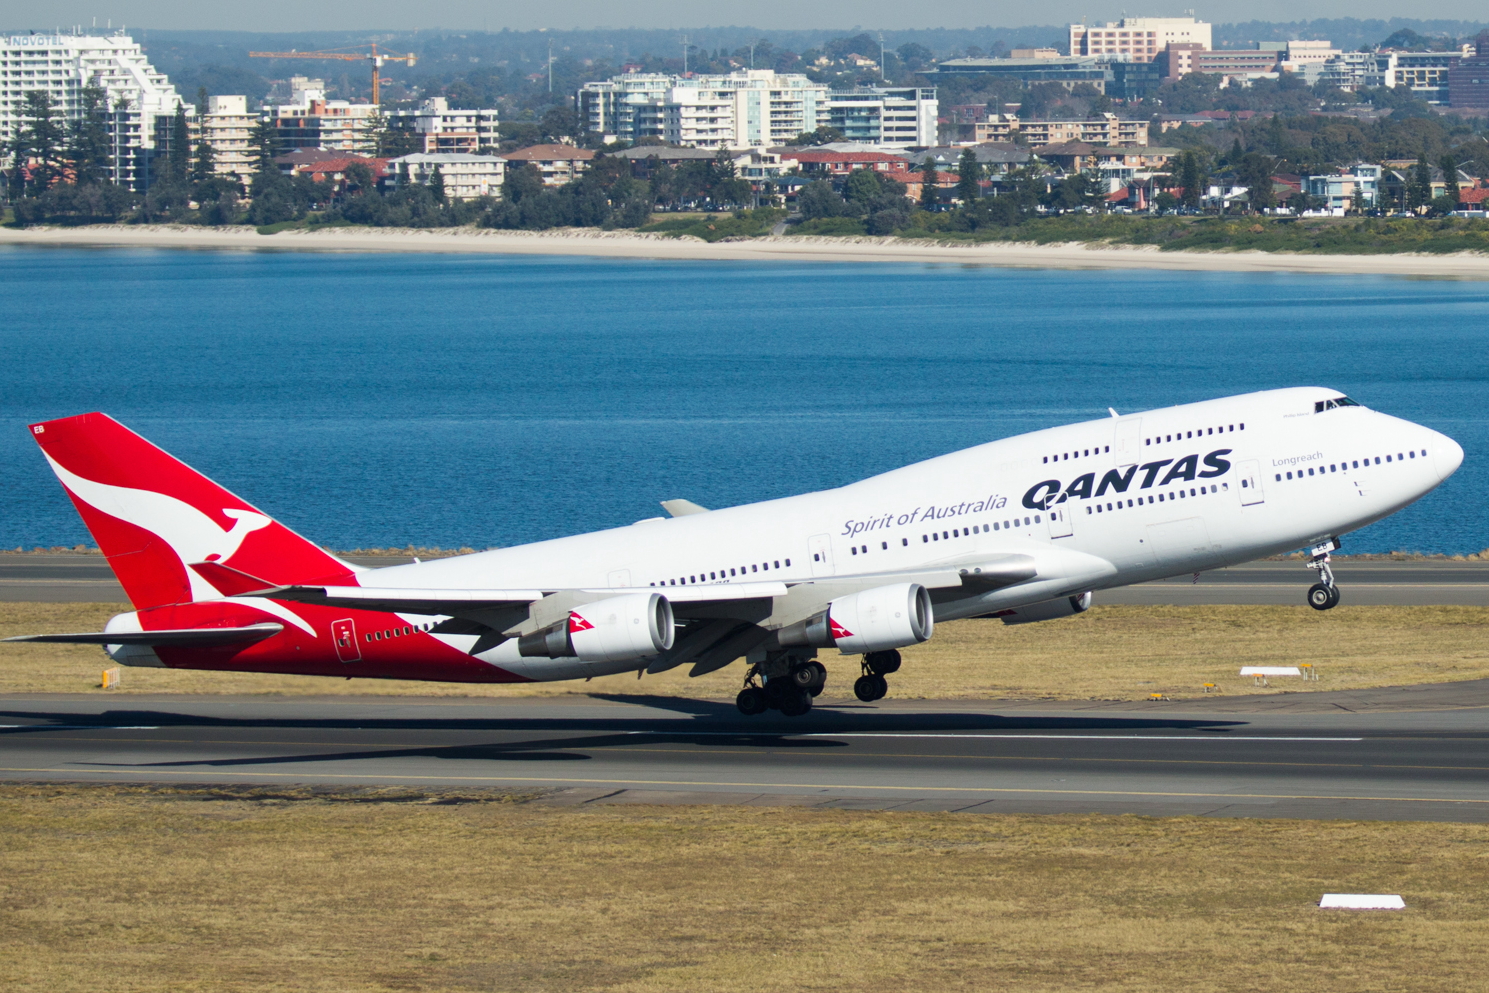 Qantas has retired its fleet of Boeing 747 jumbo jets. The final 747-400 in the fleet (registration VH-OEJ) departed Sydney on Wednesday as flight number QF7474, bringing to an end five decades of history-making moments for the national carrier and aviation in Australia. Click to enlarge.